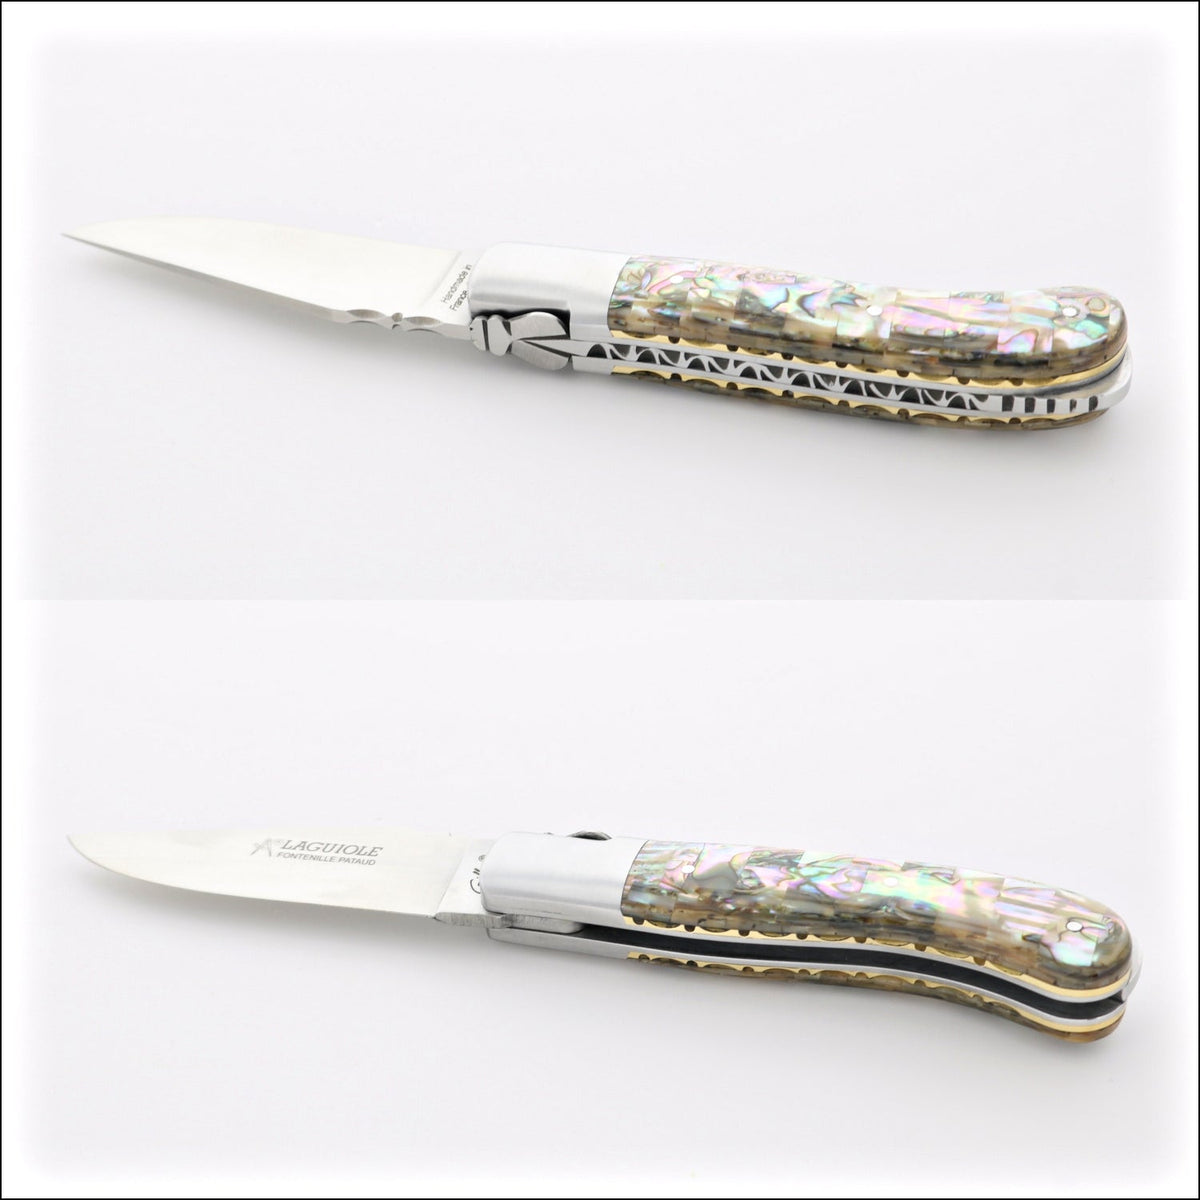 Laguiole Gentleman&#39;s Knife Guilloche - Mother of Pearl